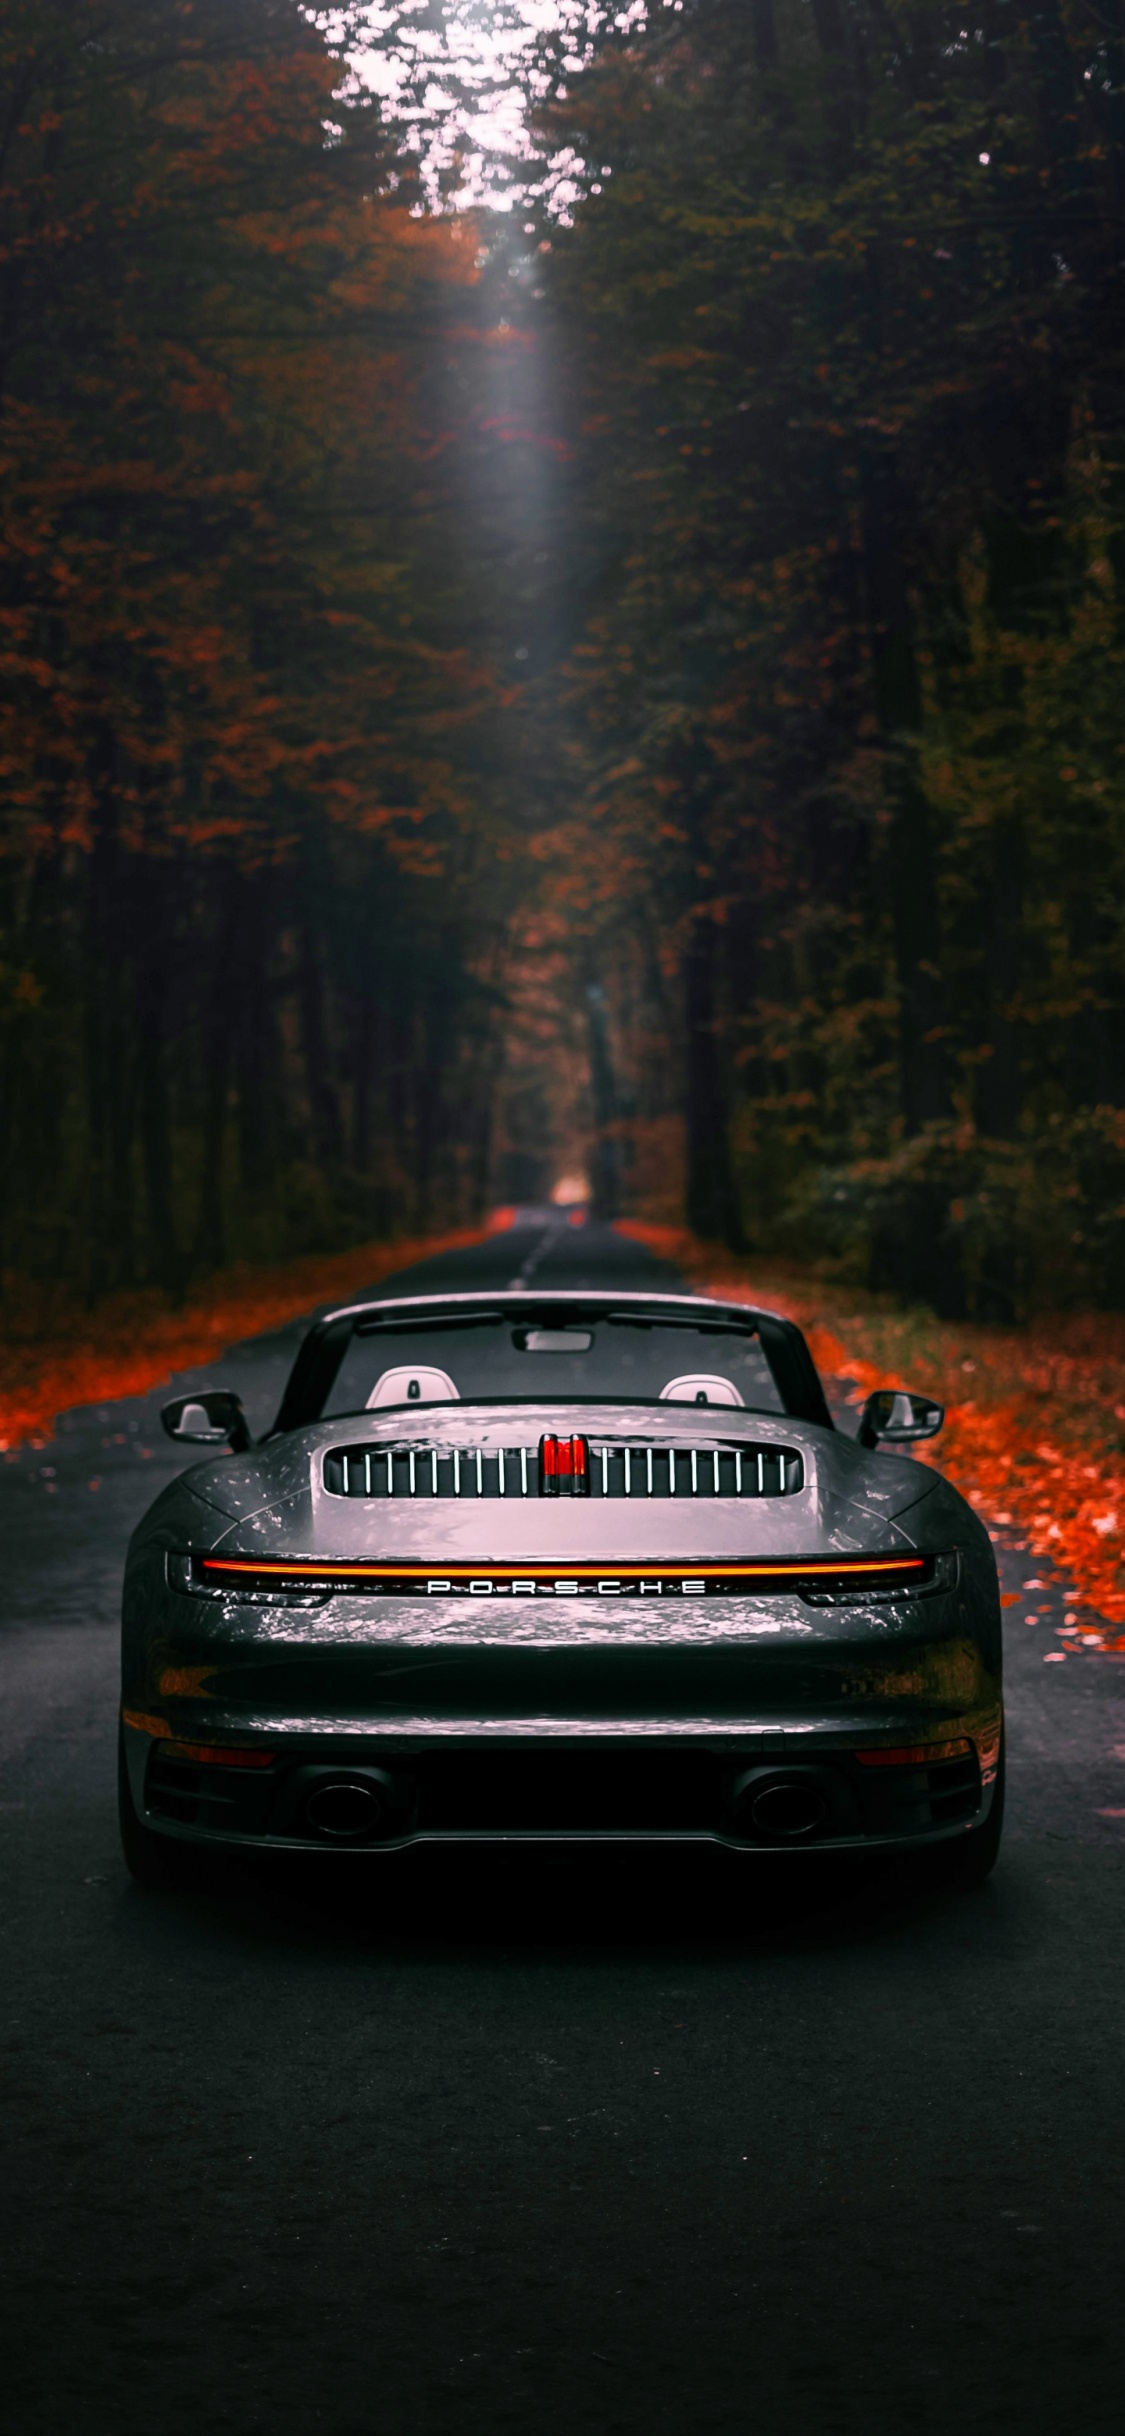 Cars IPhone Wallpaper, Free Background for IPhone X, XS, 11 Pro, Lock Screen Wallpaper 1125x2436